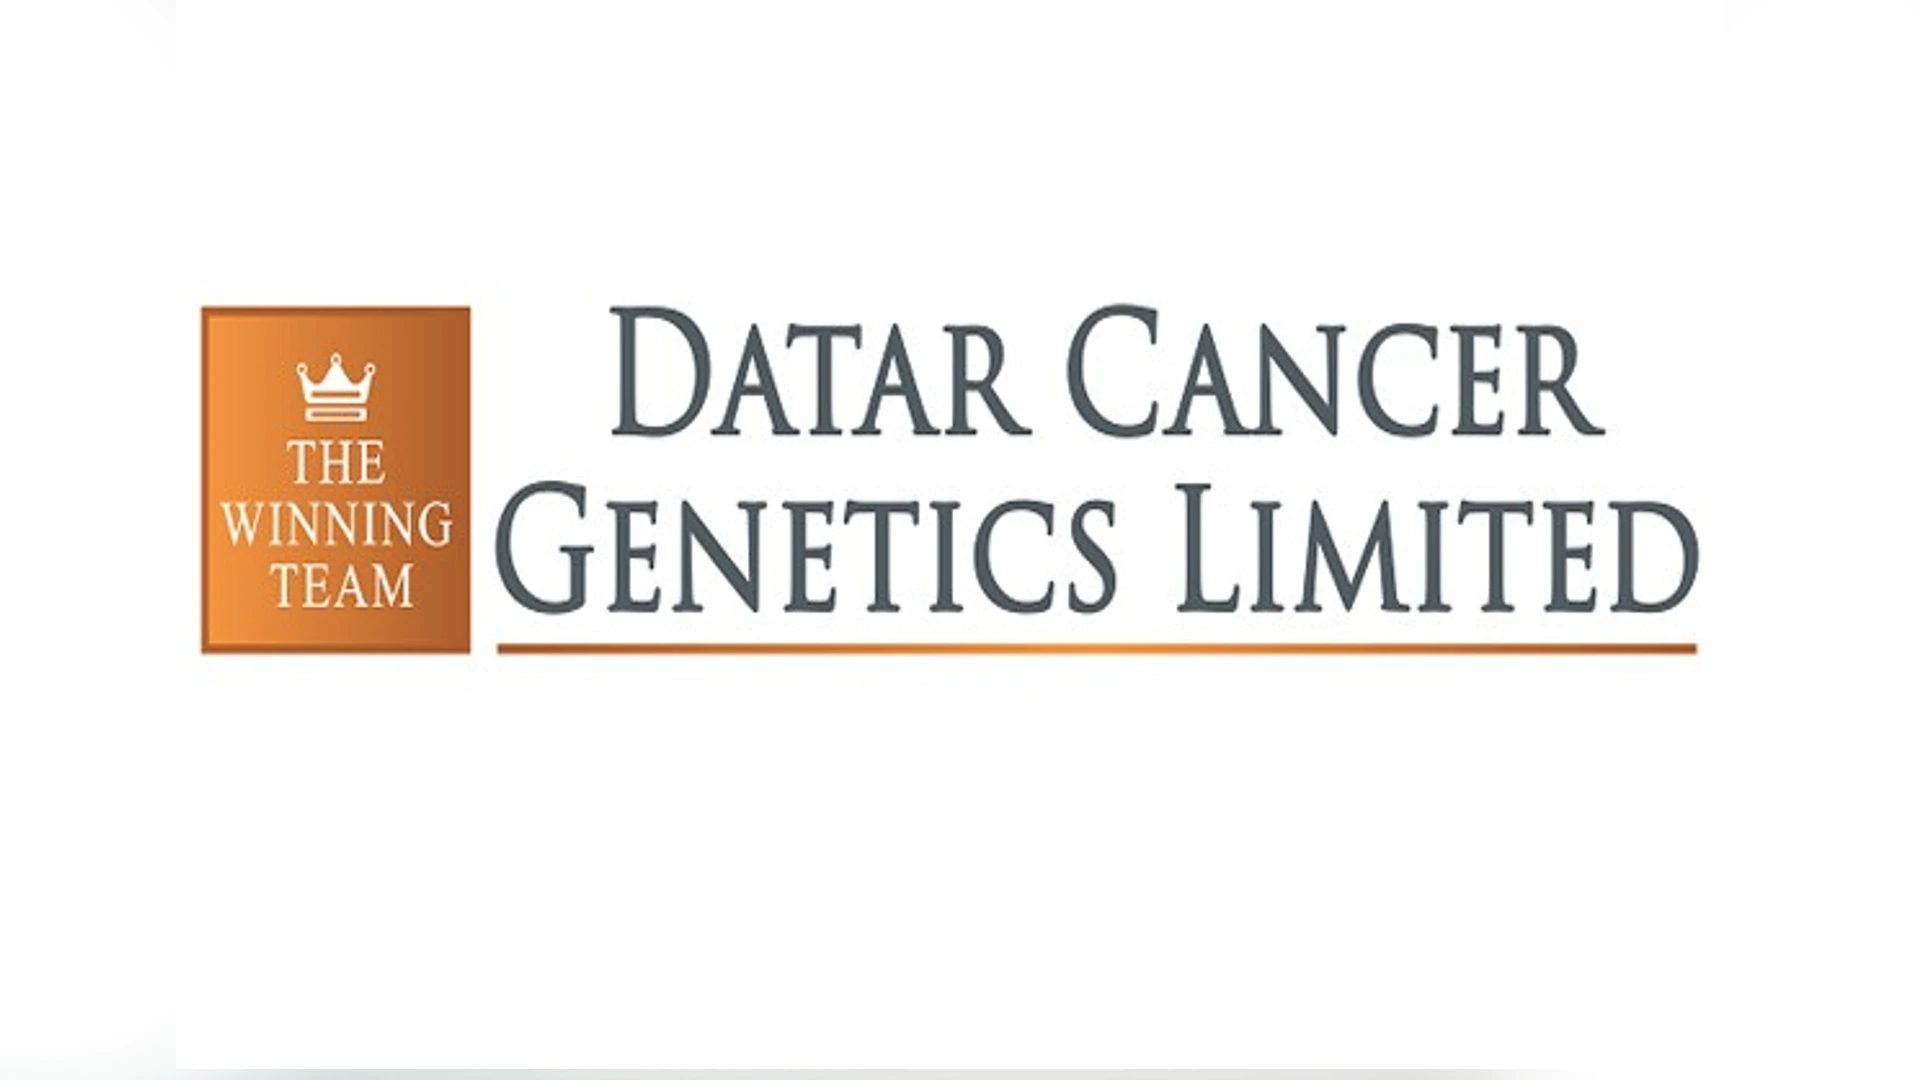 Datar Cancer Genetics Received the CE Mark for its Cancer Test